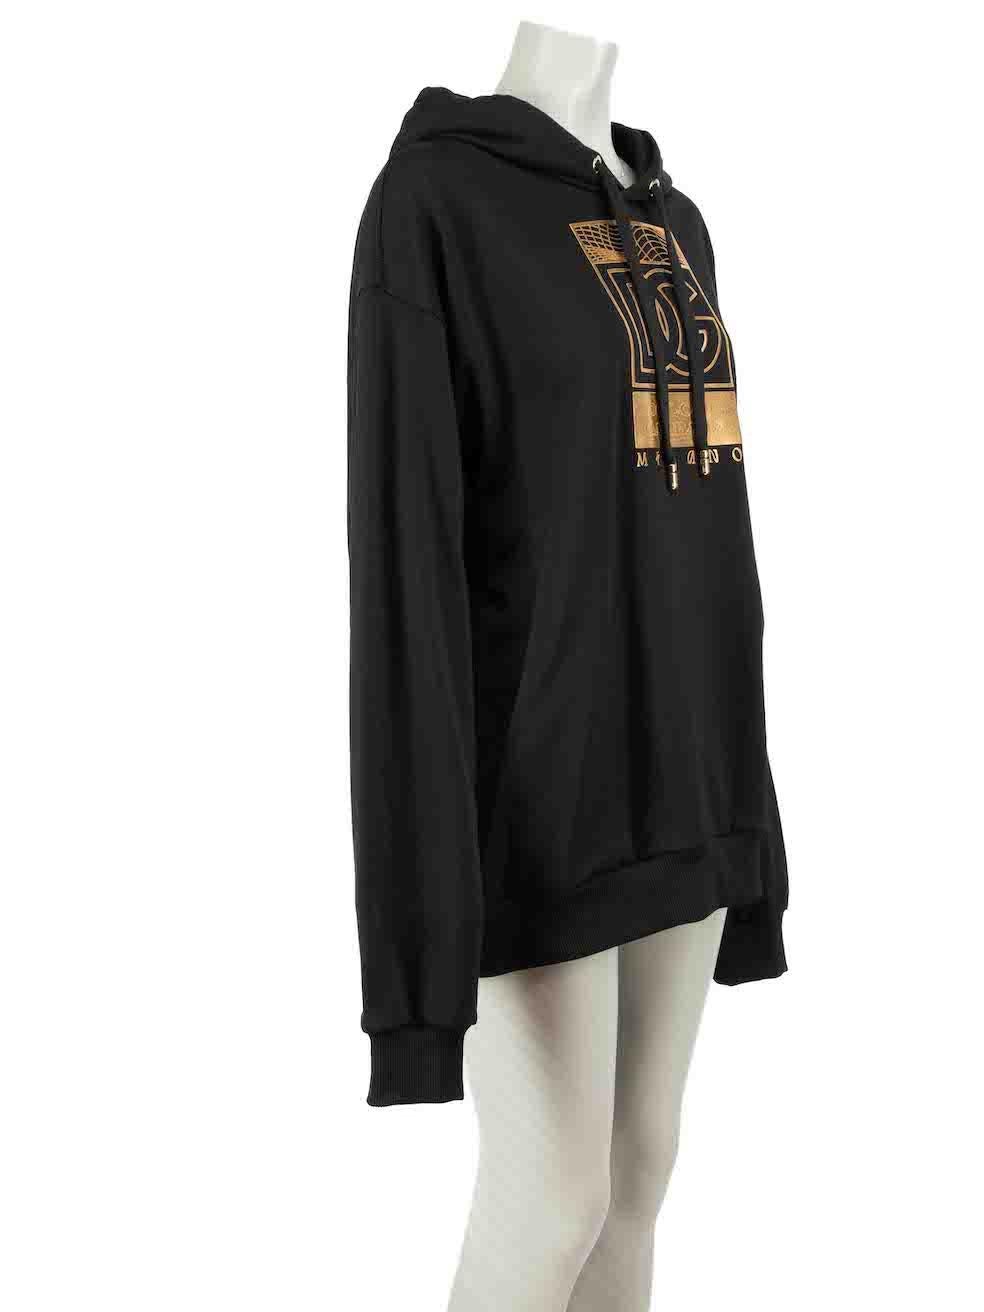 CONDITION is Never worn, with tags. No visible wear to hoodie is evident on this new Dolce & Gabbana designer resale item.
 
Details
Unisex
Black
Cotton
Long sleeves hoodie
Oversized fit
Gold tone Realt Parallela print
Hooded with drawstring

Made